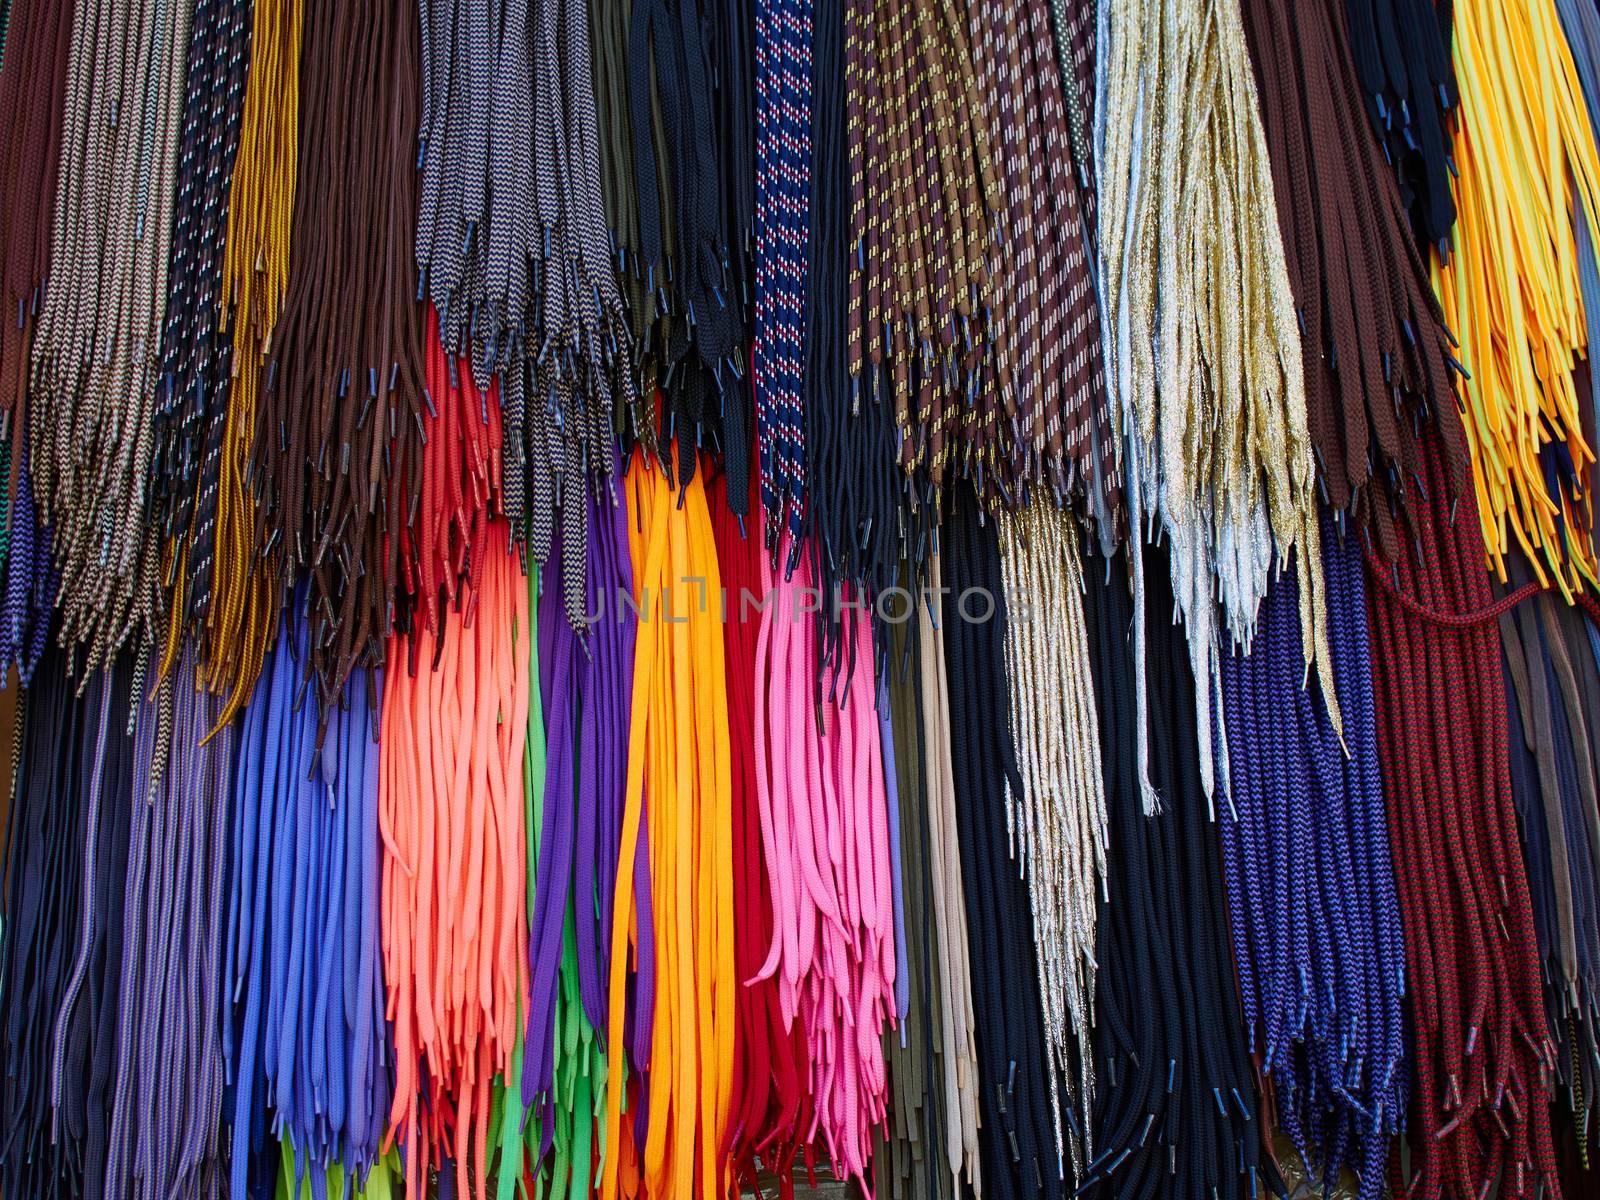 Display of bright colorful shoe laces in a shop